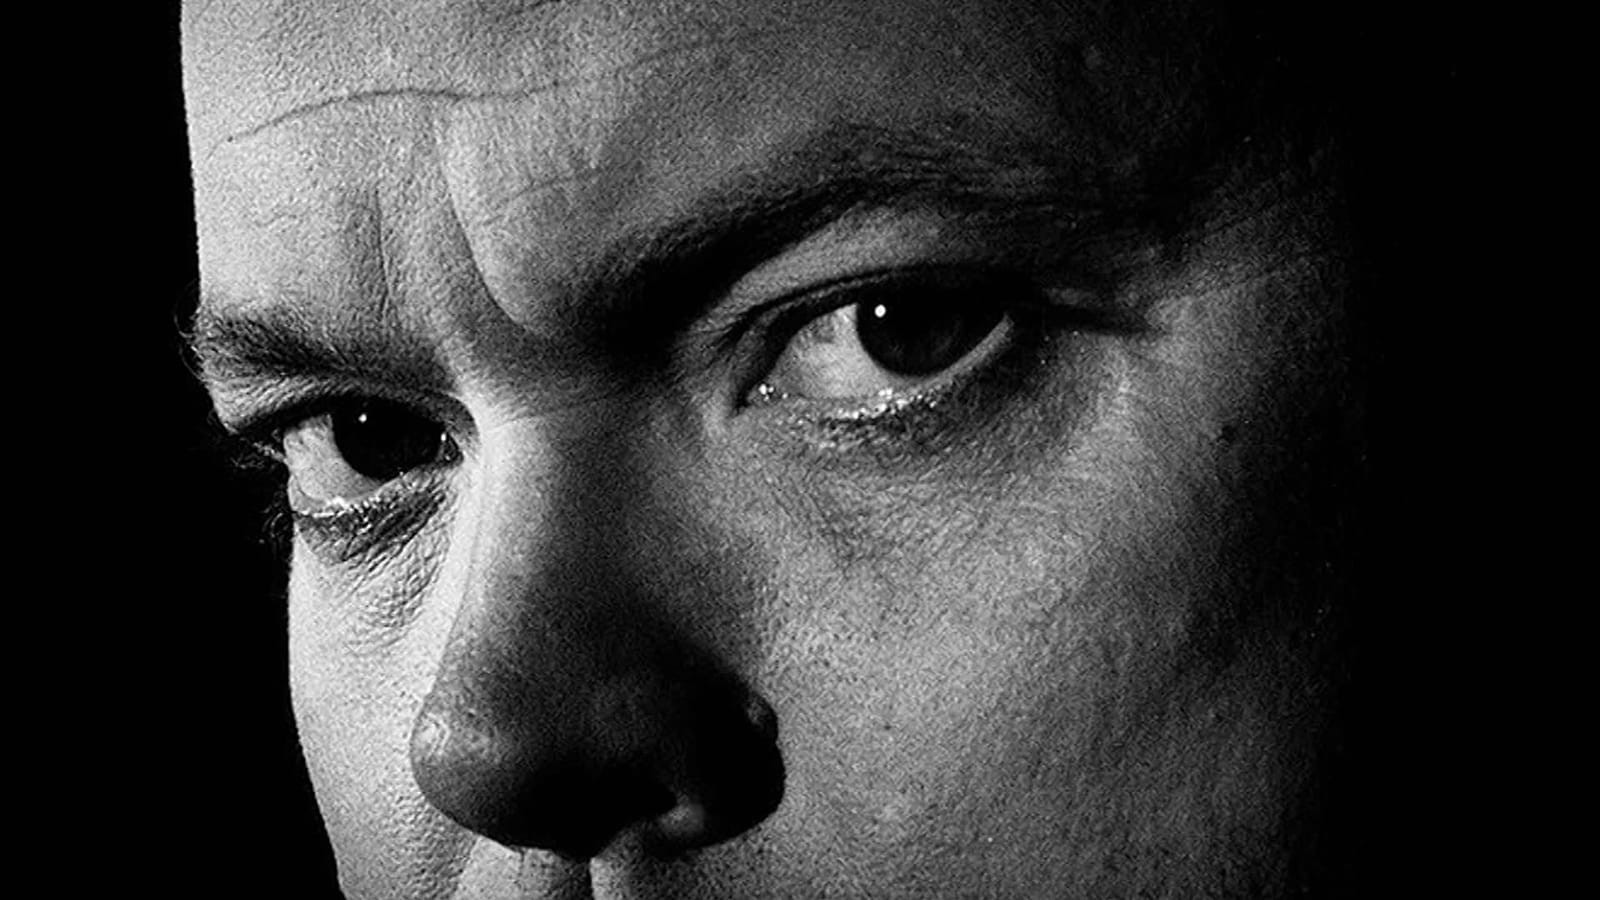 The Eyes of Orson Welles